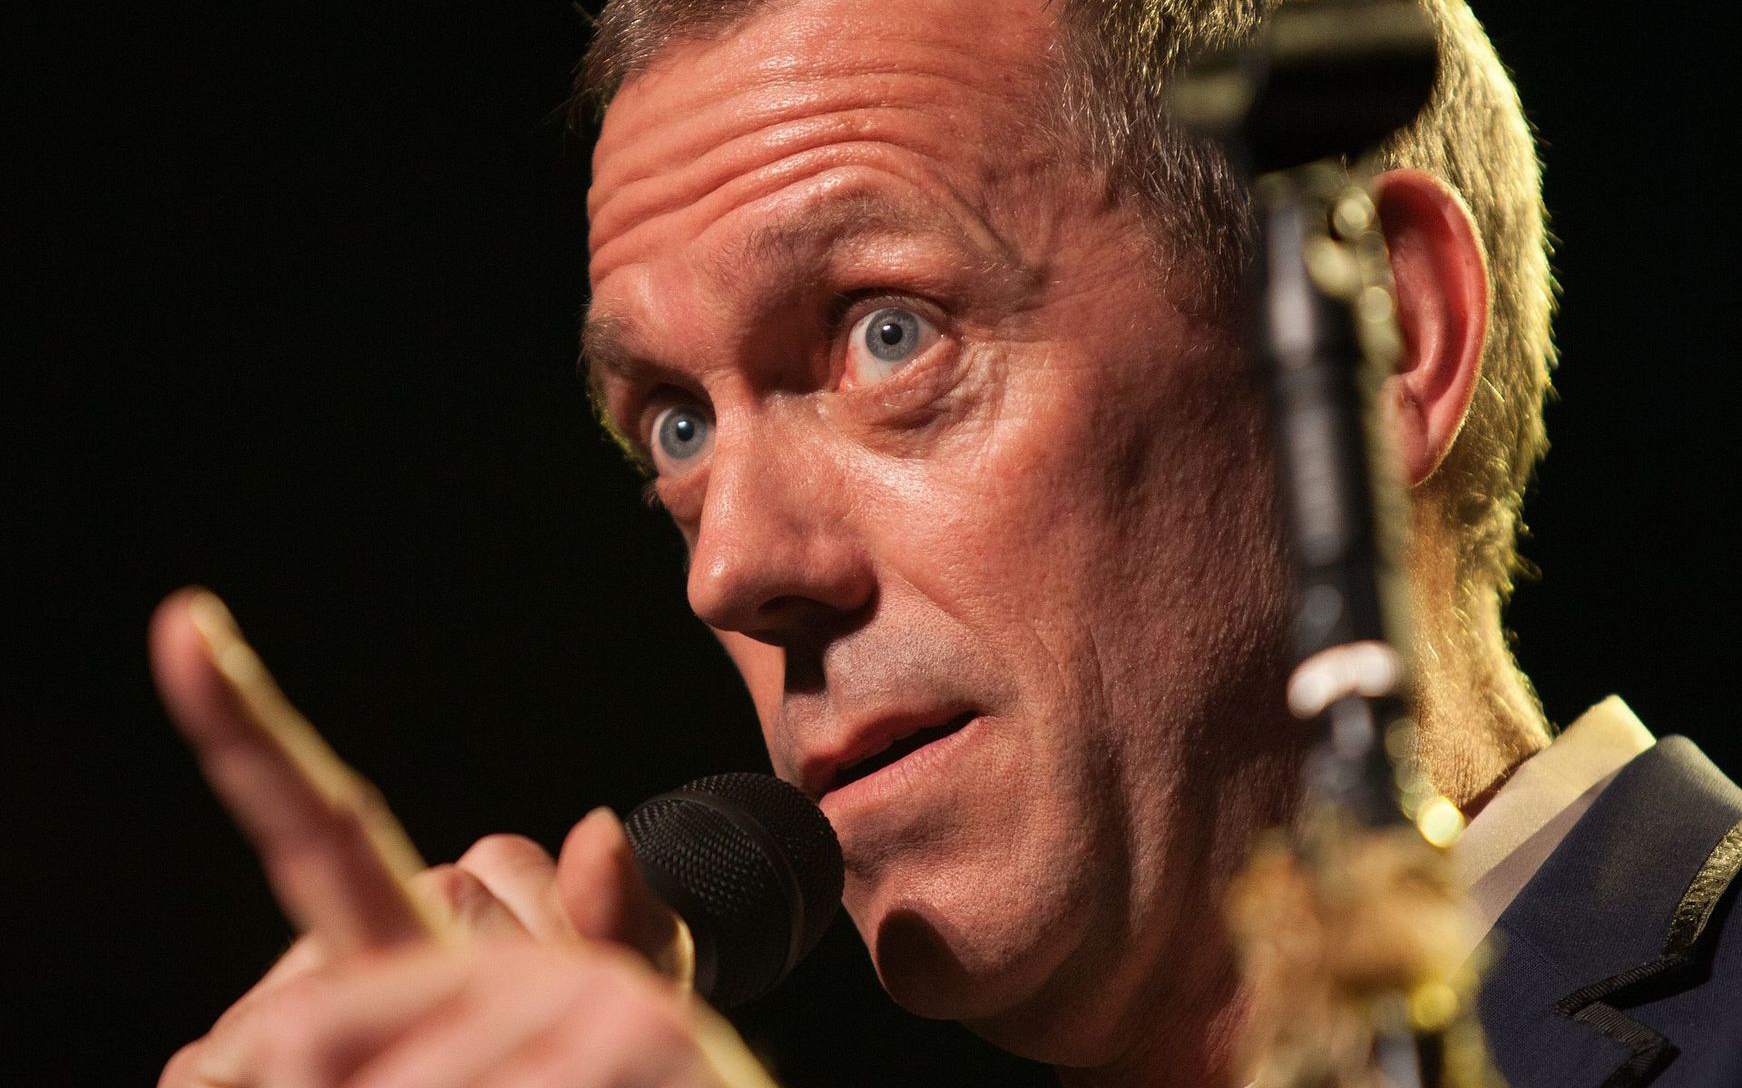 Hugh Laurie with microphone answering questions